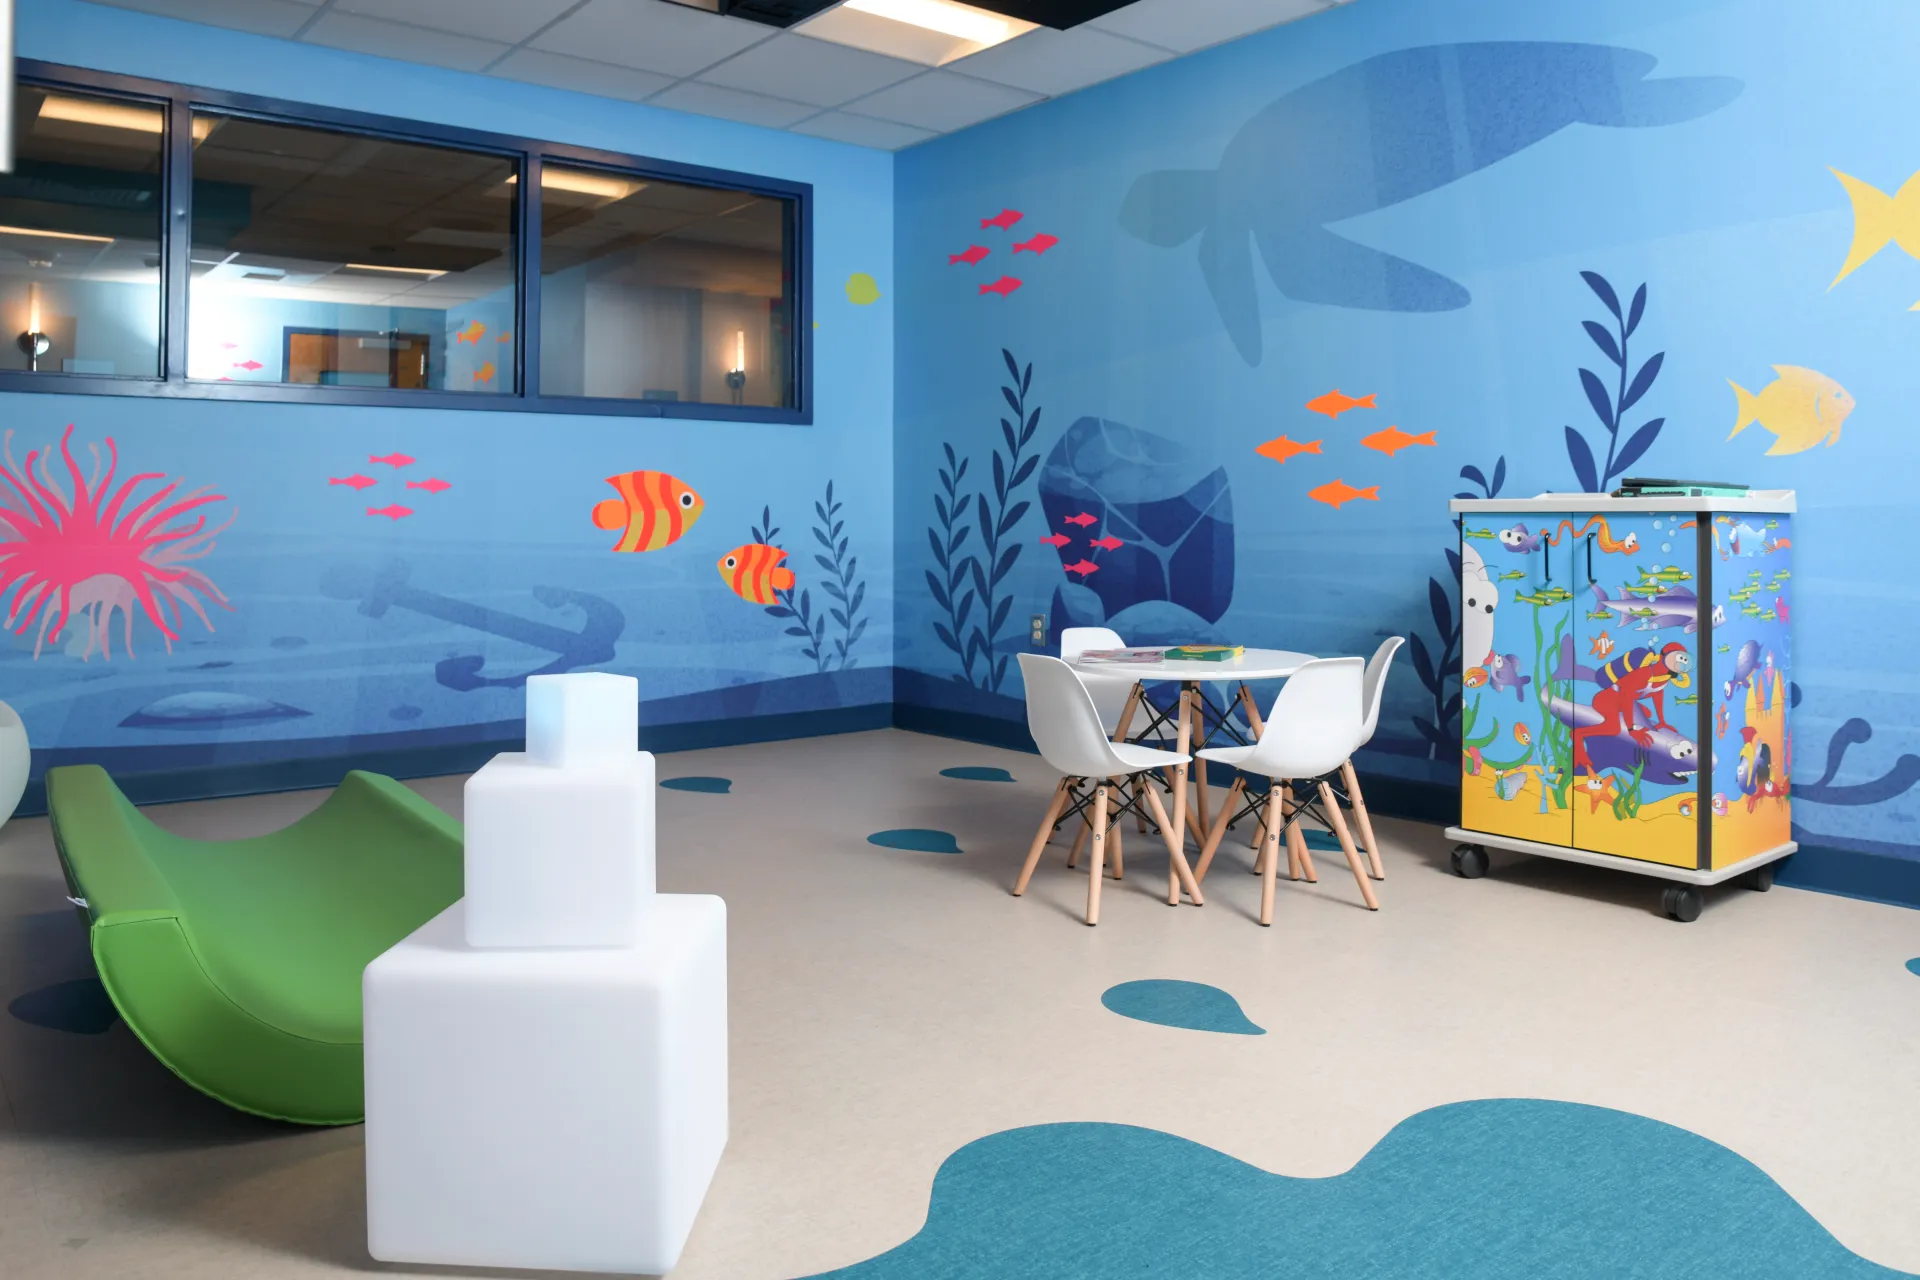 Hospital room with colorful underwater cartoons painted on the walls